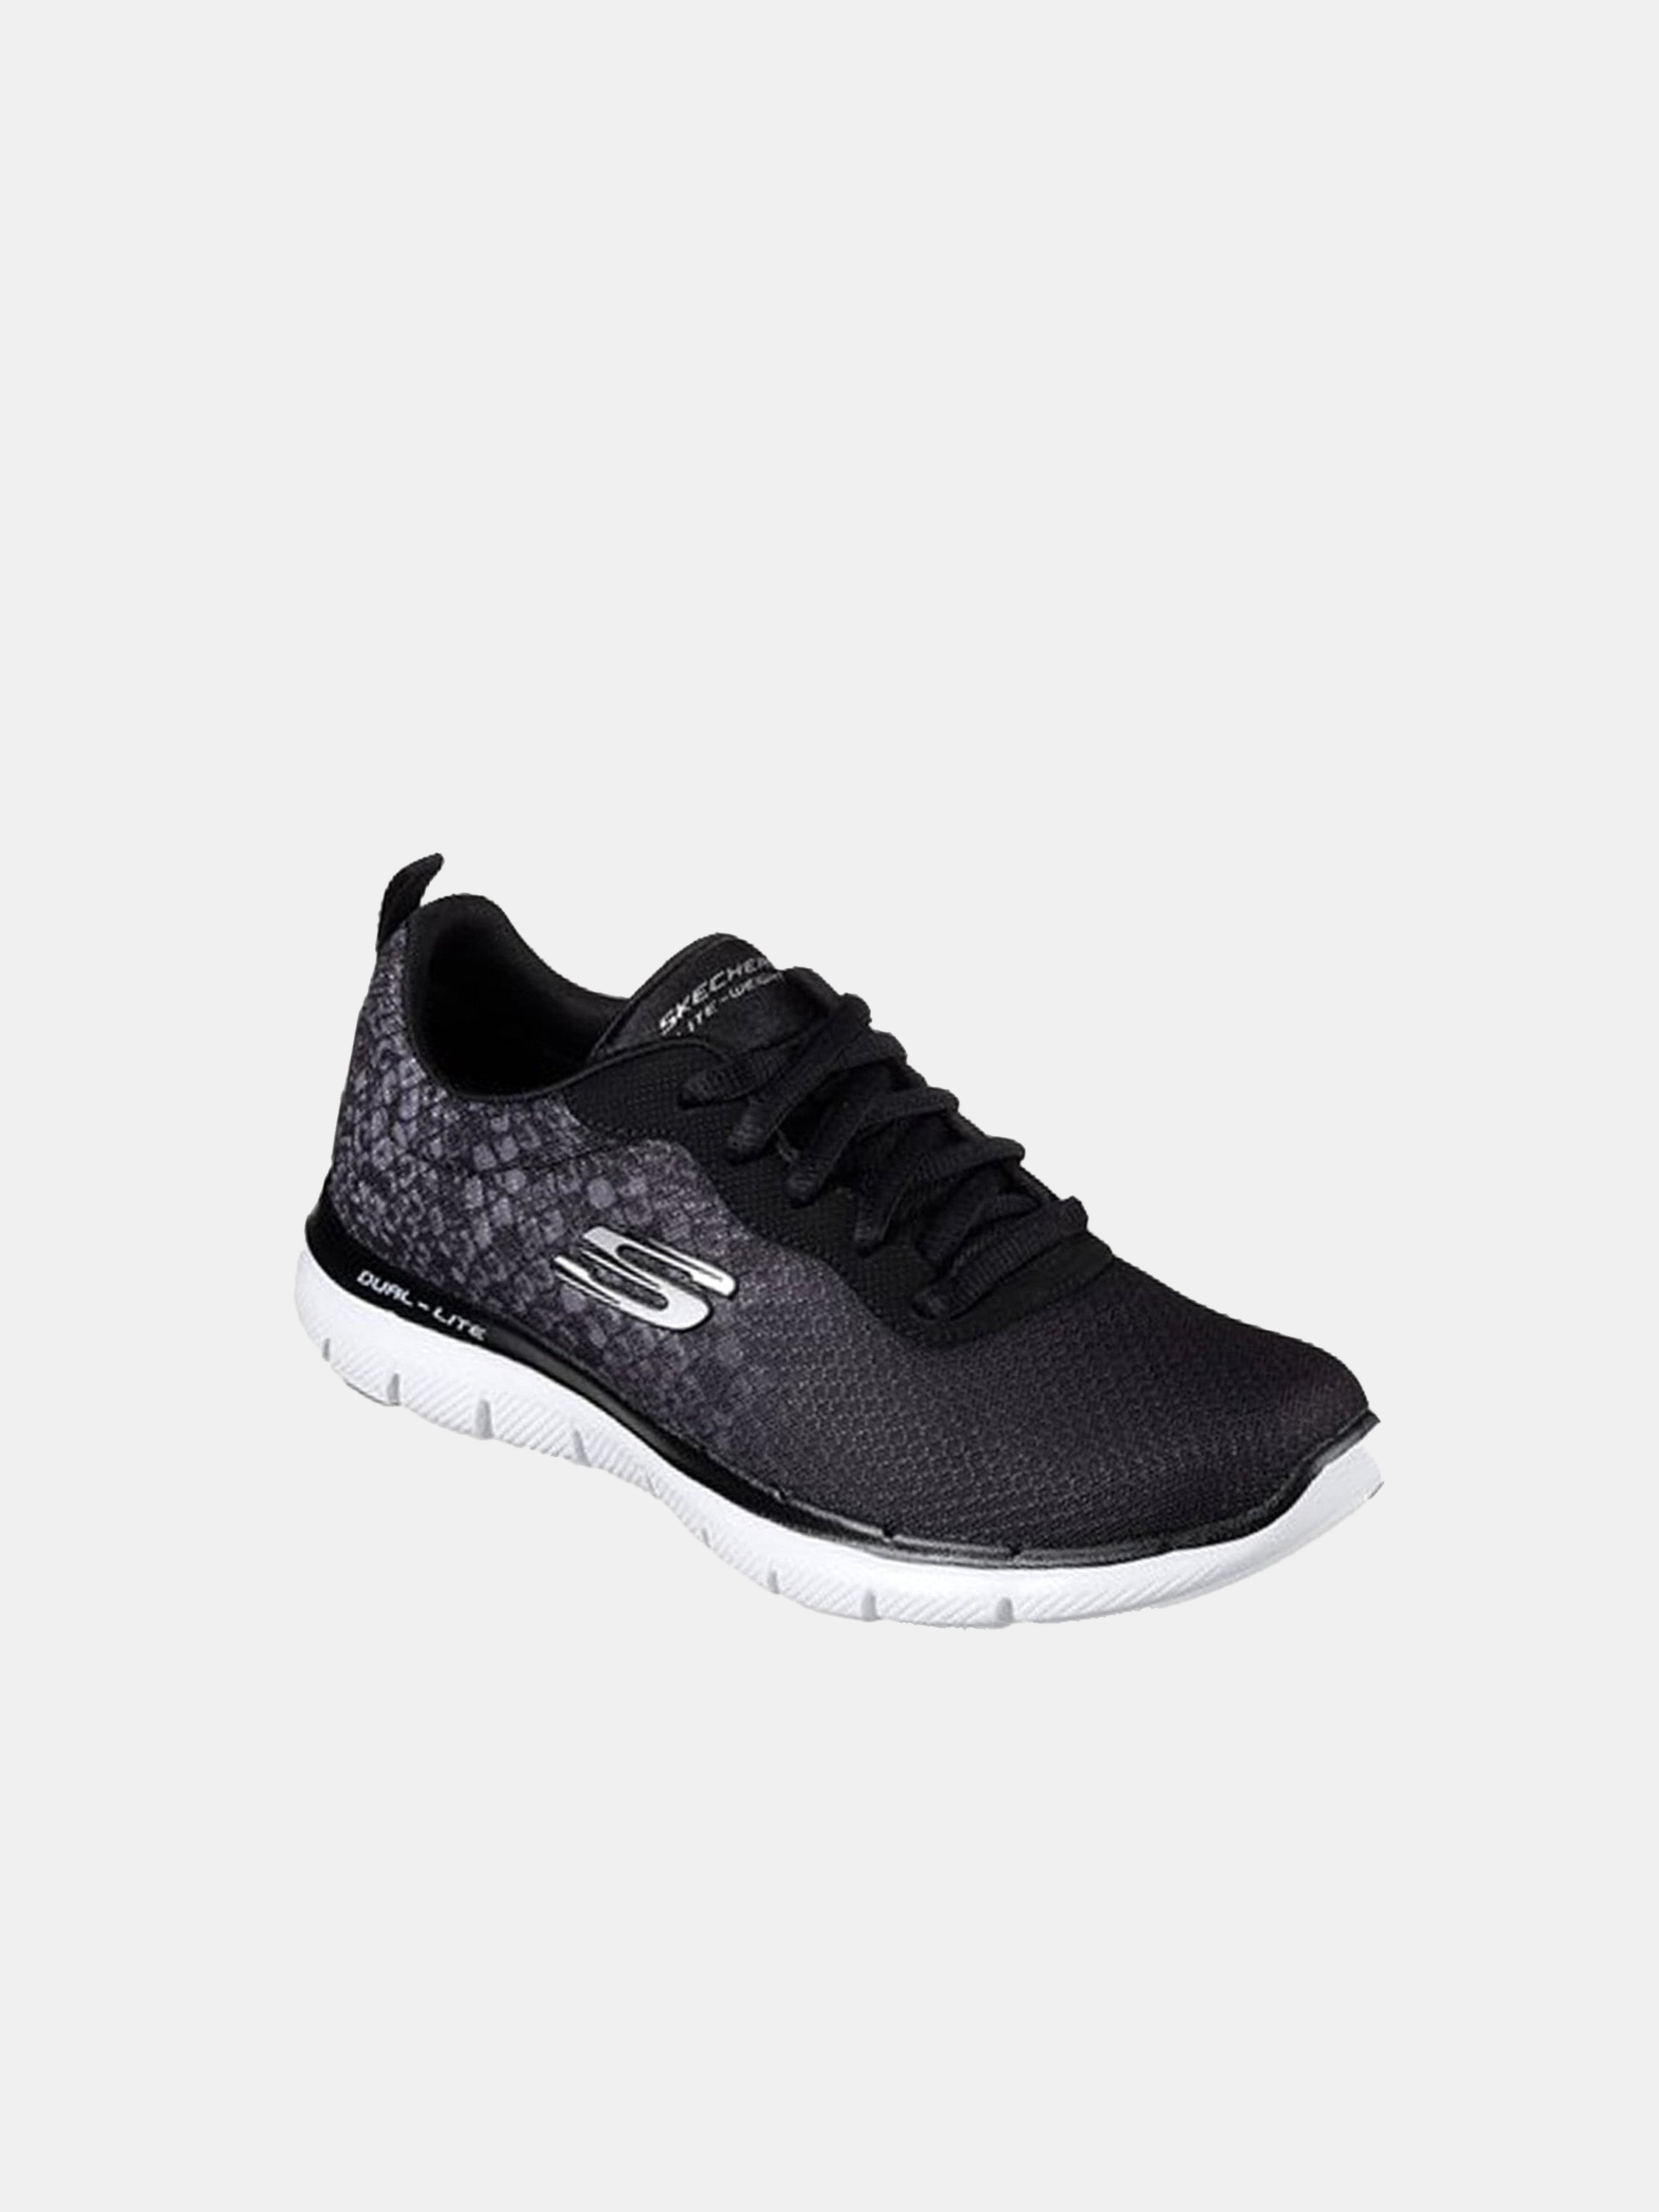 miles Ligegyldighed Ved Skechers Women's Flex Appeal 2.0 Trainers